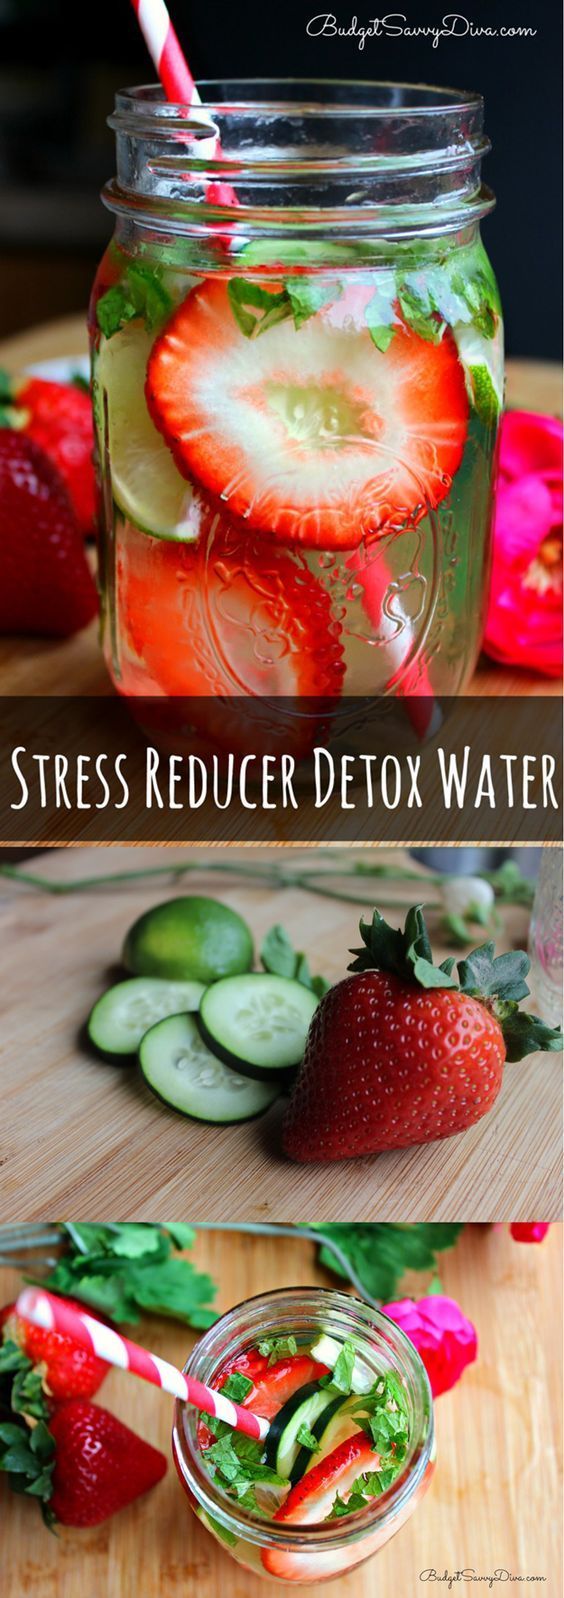 Stress Relief Drinks: Stress Reducer Detox Water | Easy Healthy Detox Water Recipe by DIY Ready at